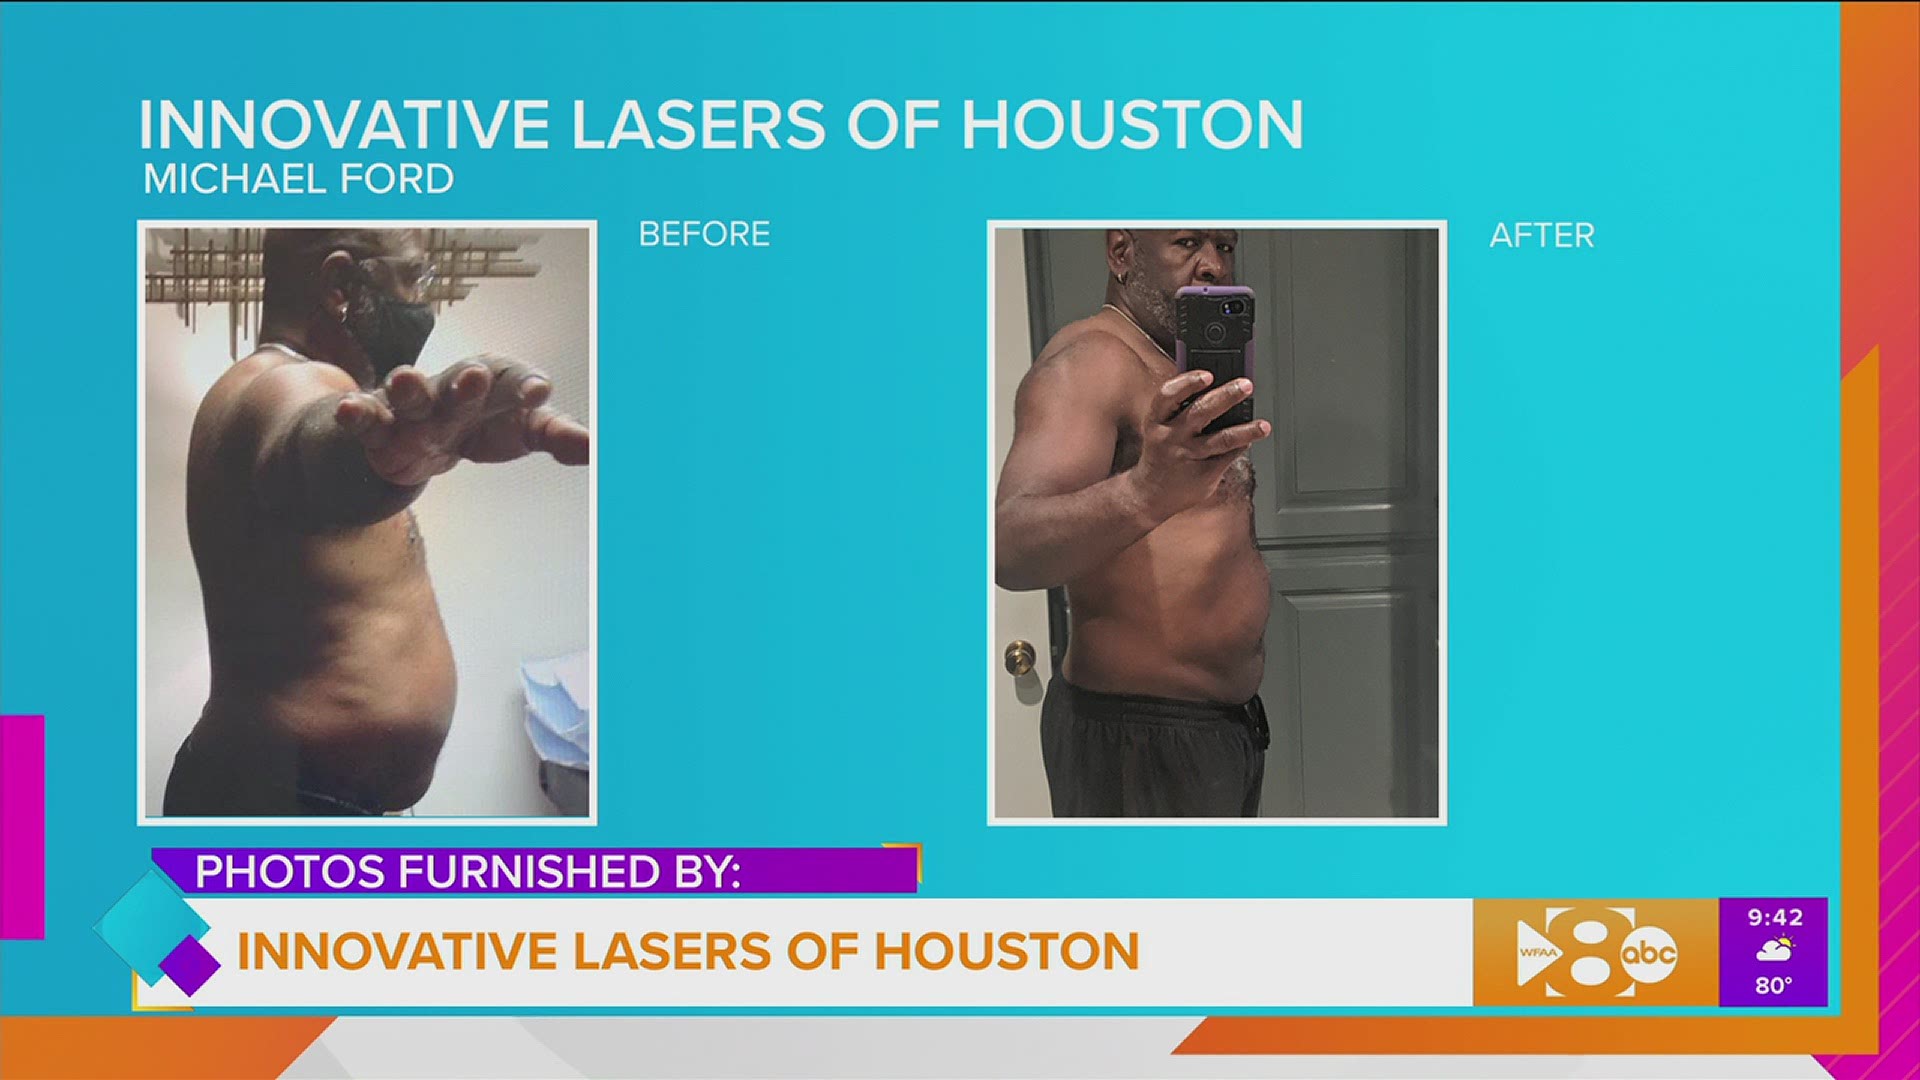 This segment is sponsored by: Innovative Lasers of Houston